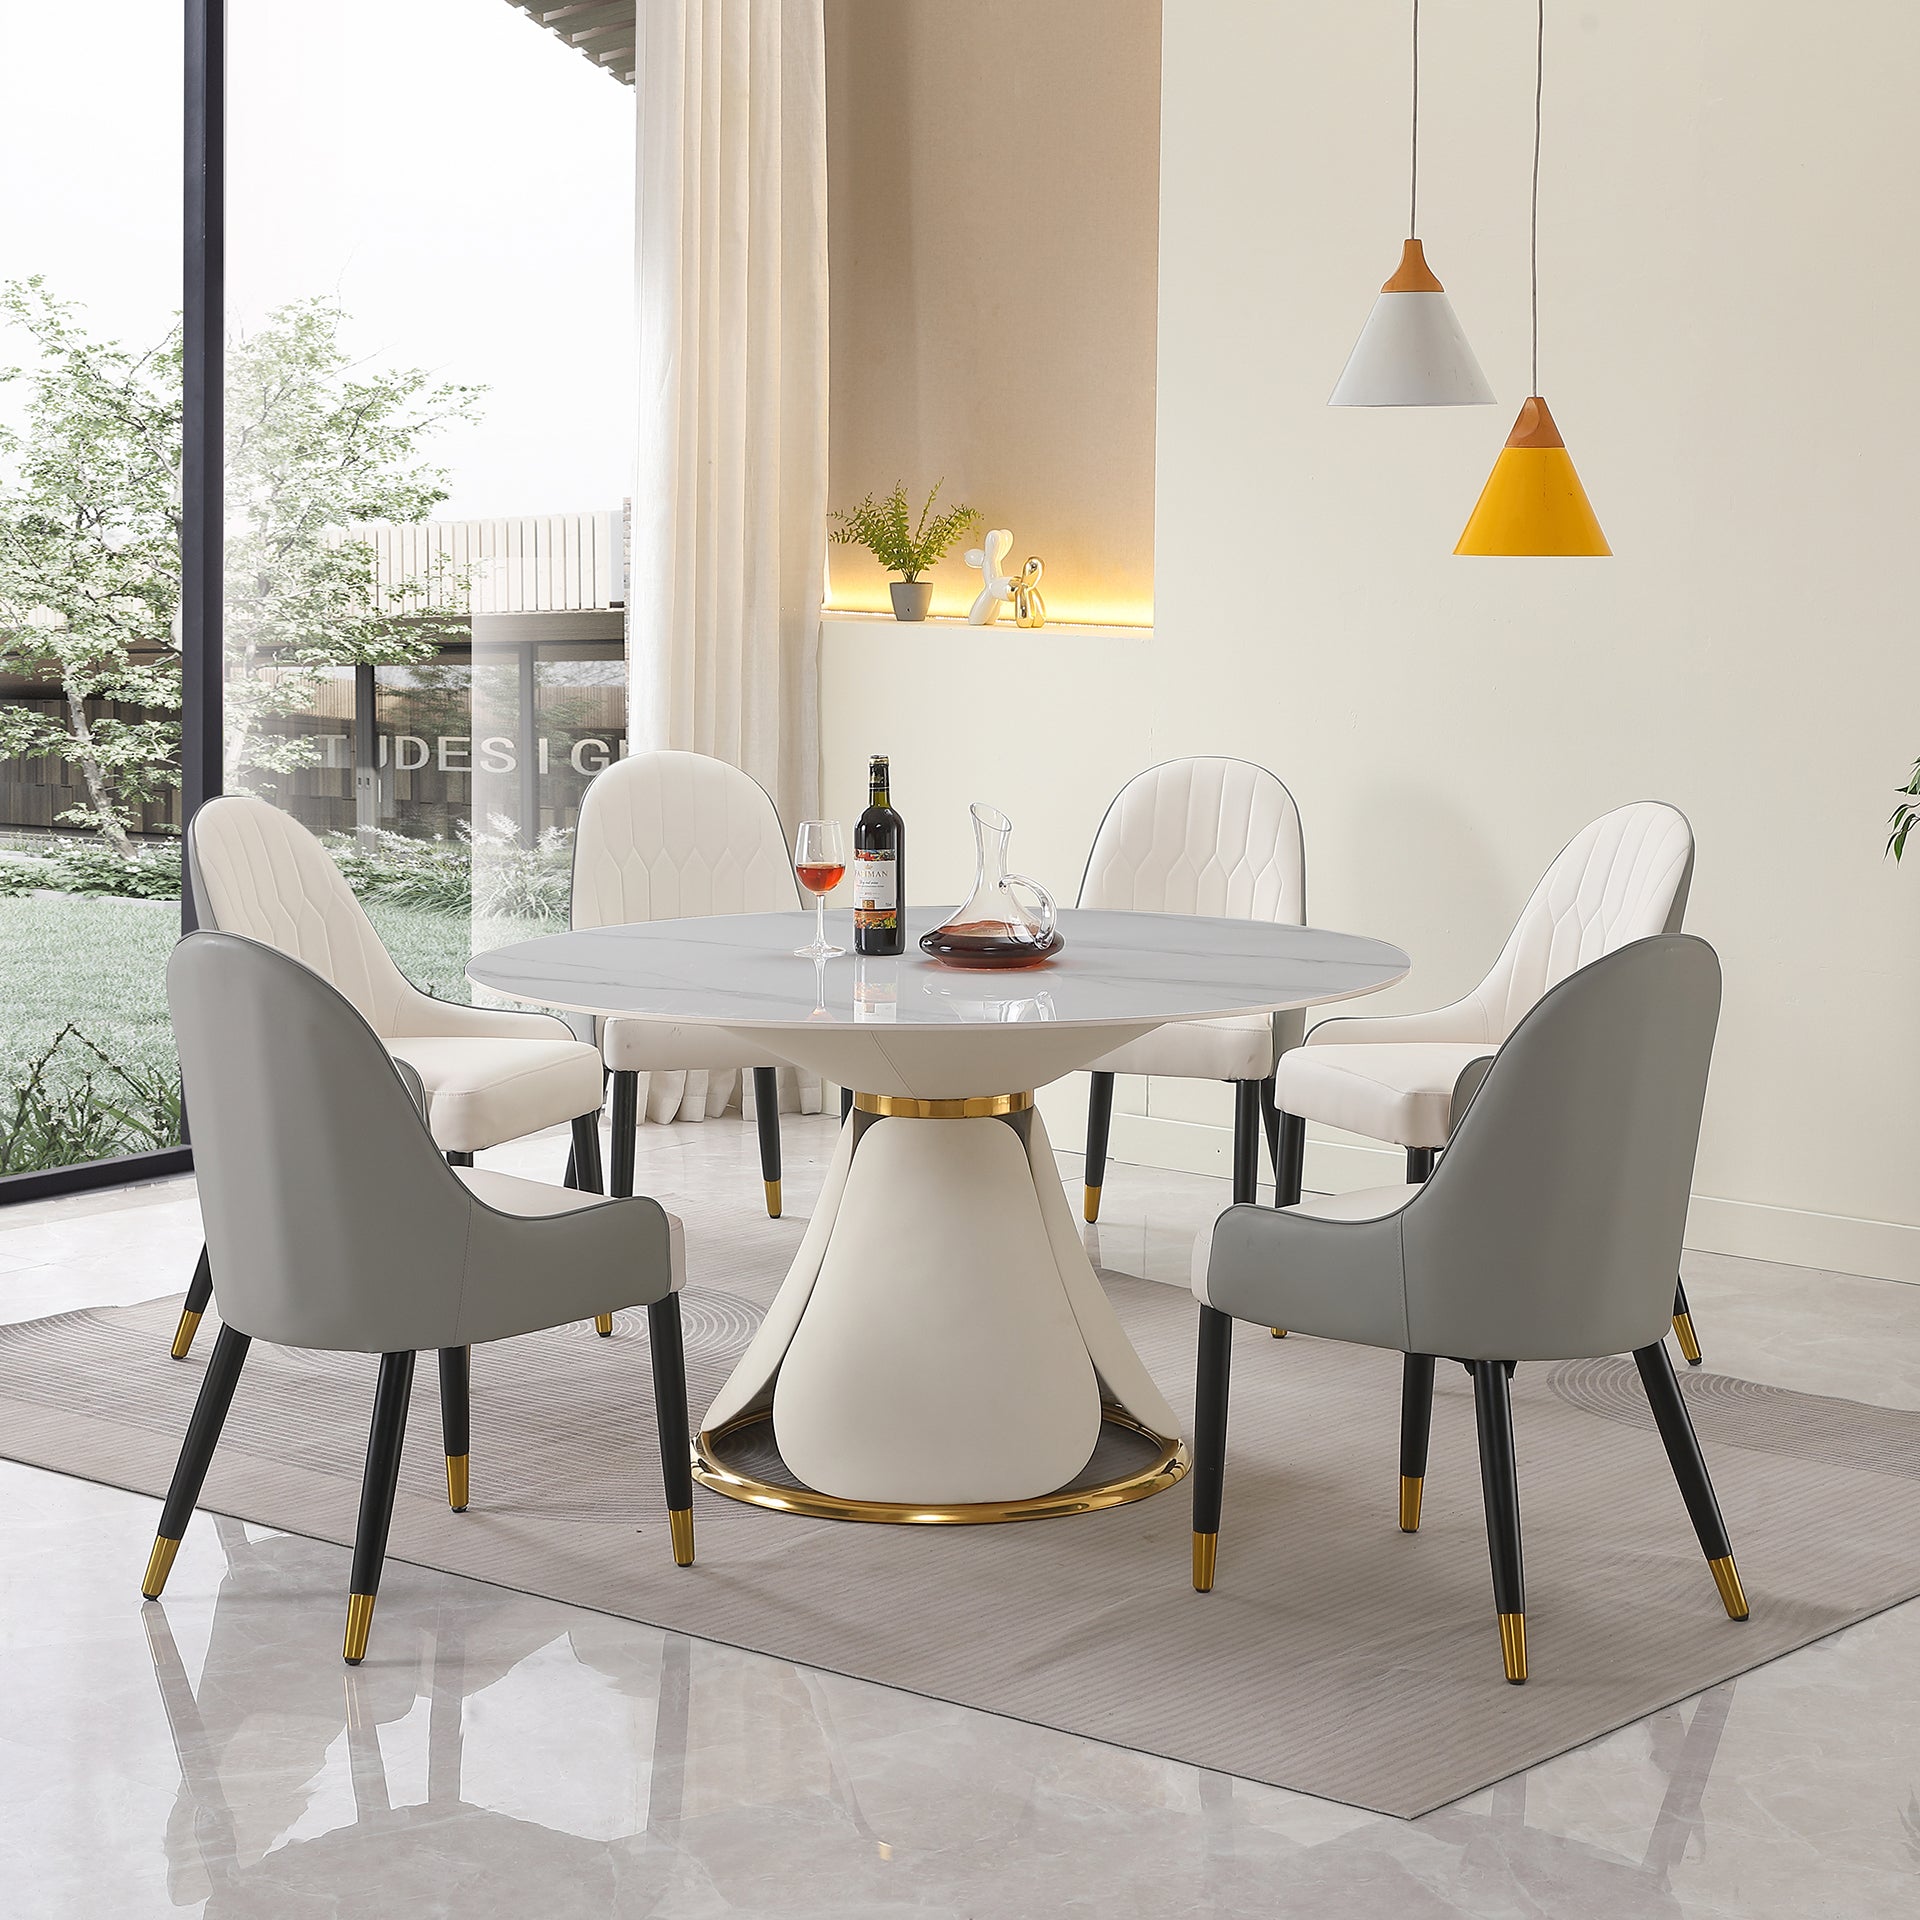 Leavader® 53“ Modern Sintered Stone Round Dining Table with Stainless Steel Base with 6 Pcs Chairs